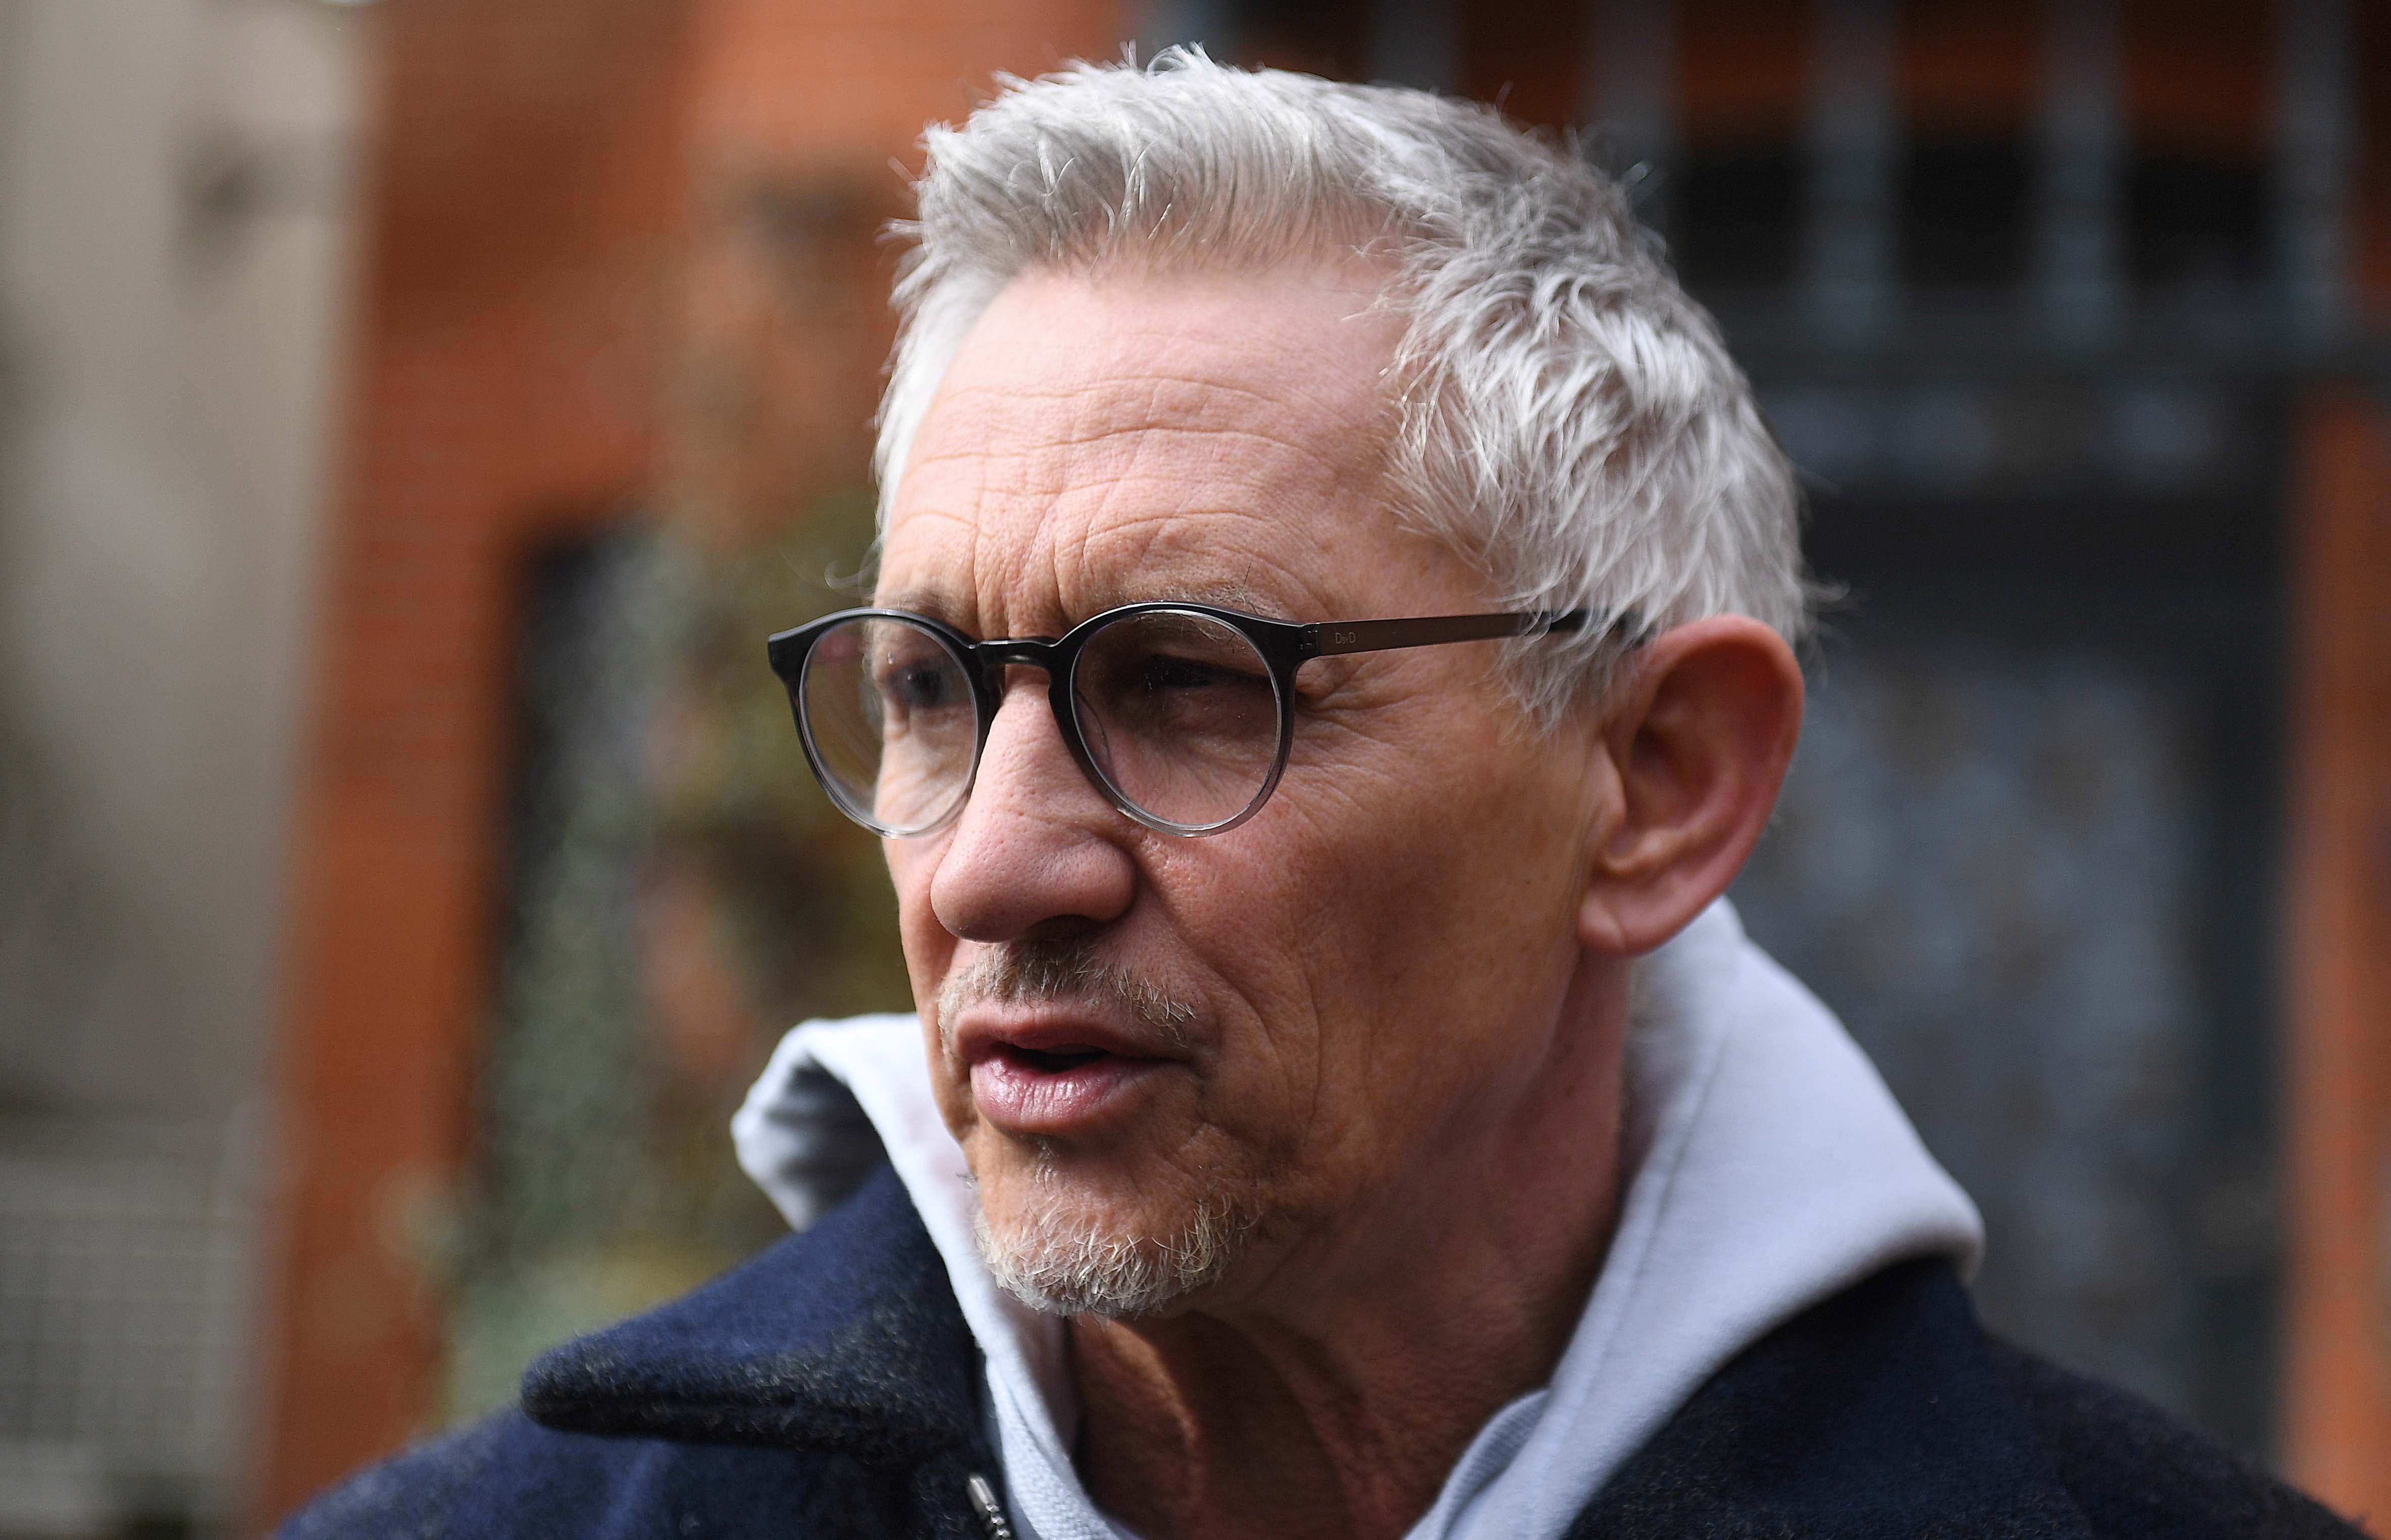 Lineker was suspended too rapidly by the broadcaster